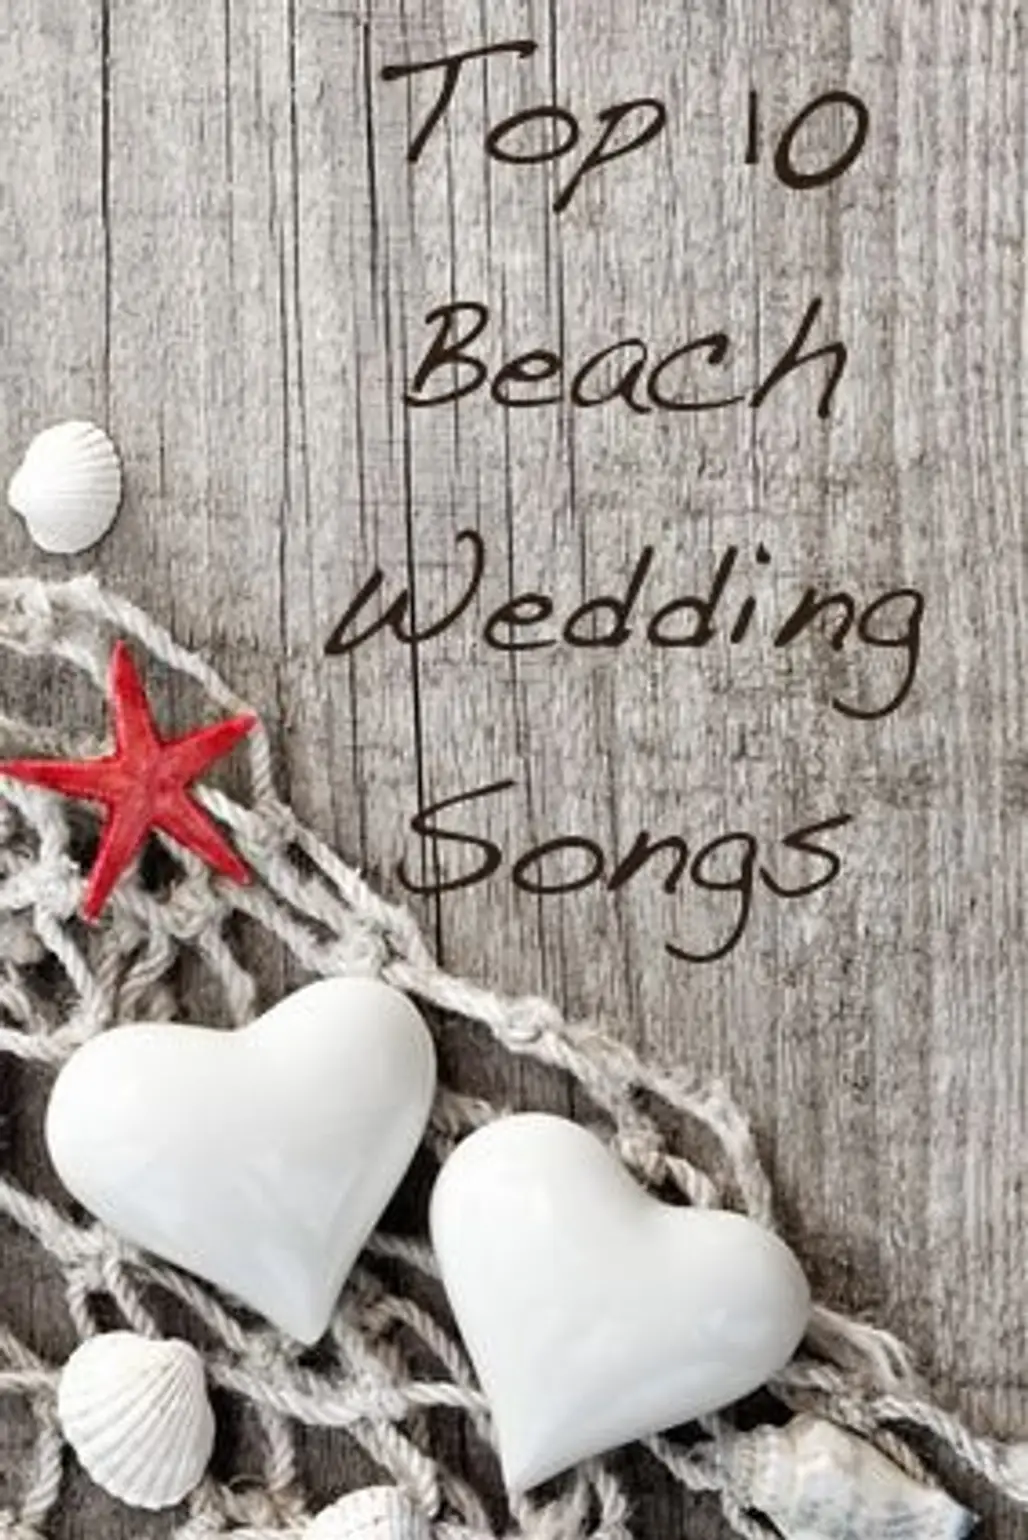 Beach Wedding Songs for Your Ceremony Walk down the Aisle to Your First Dance or Last Dance Song!